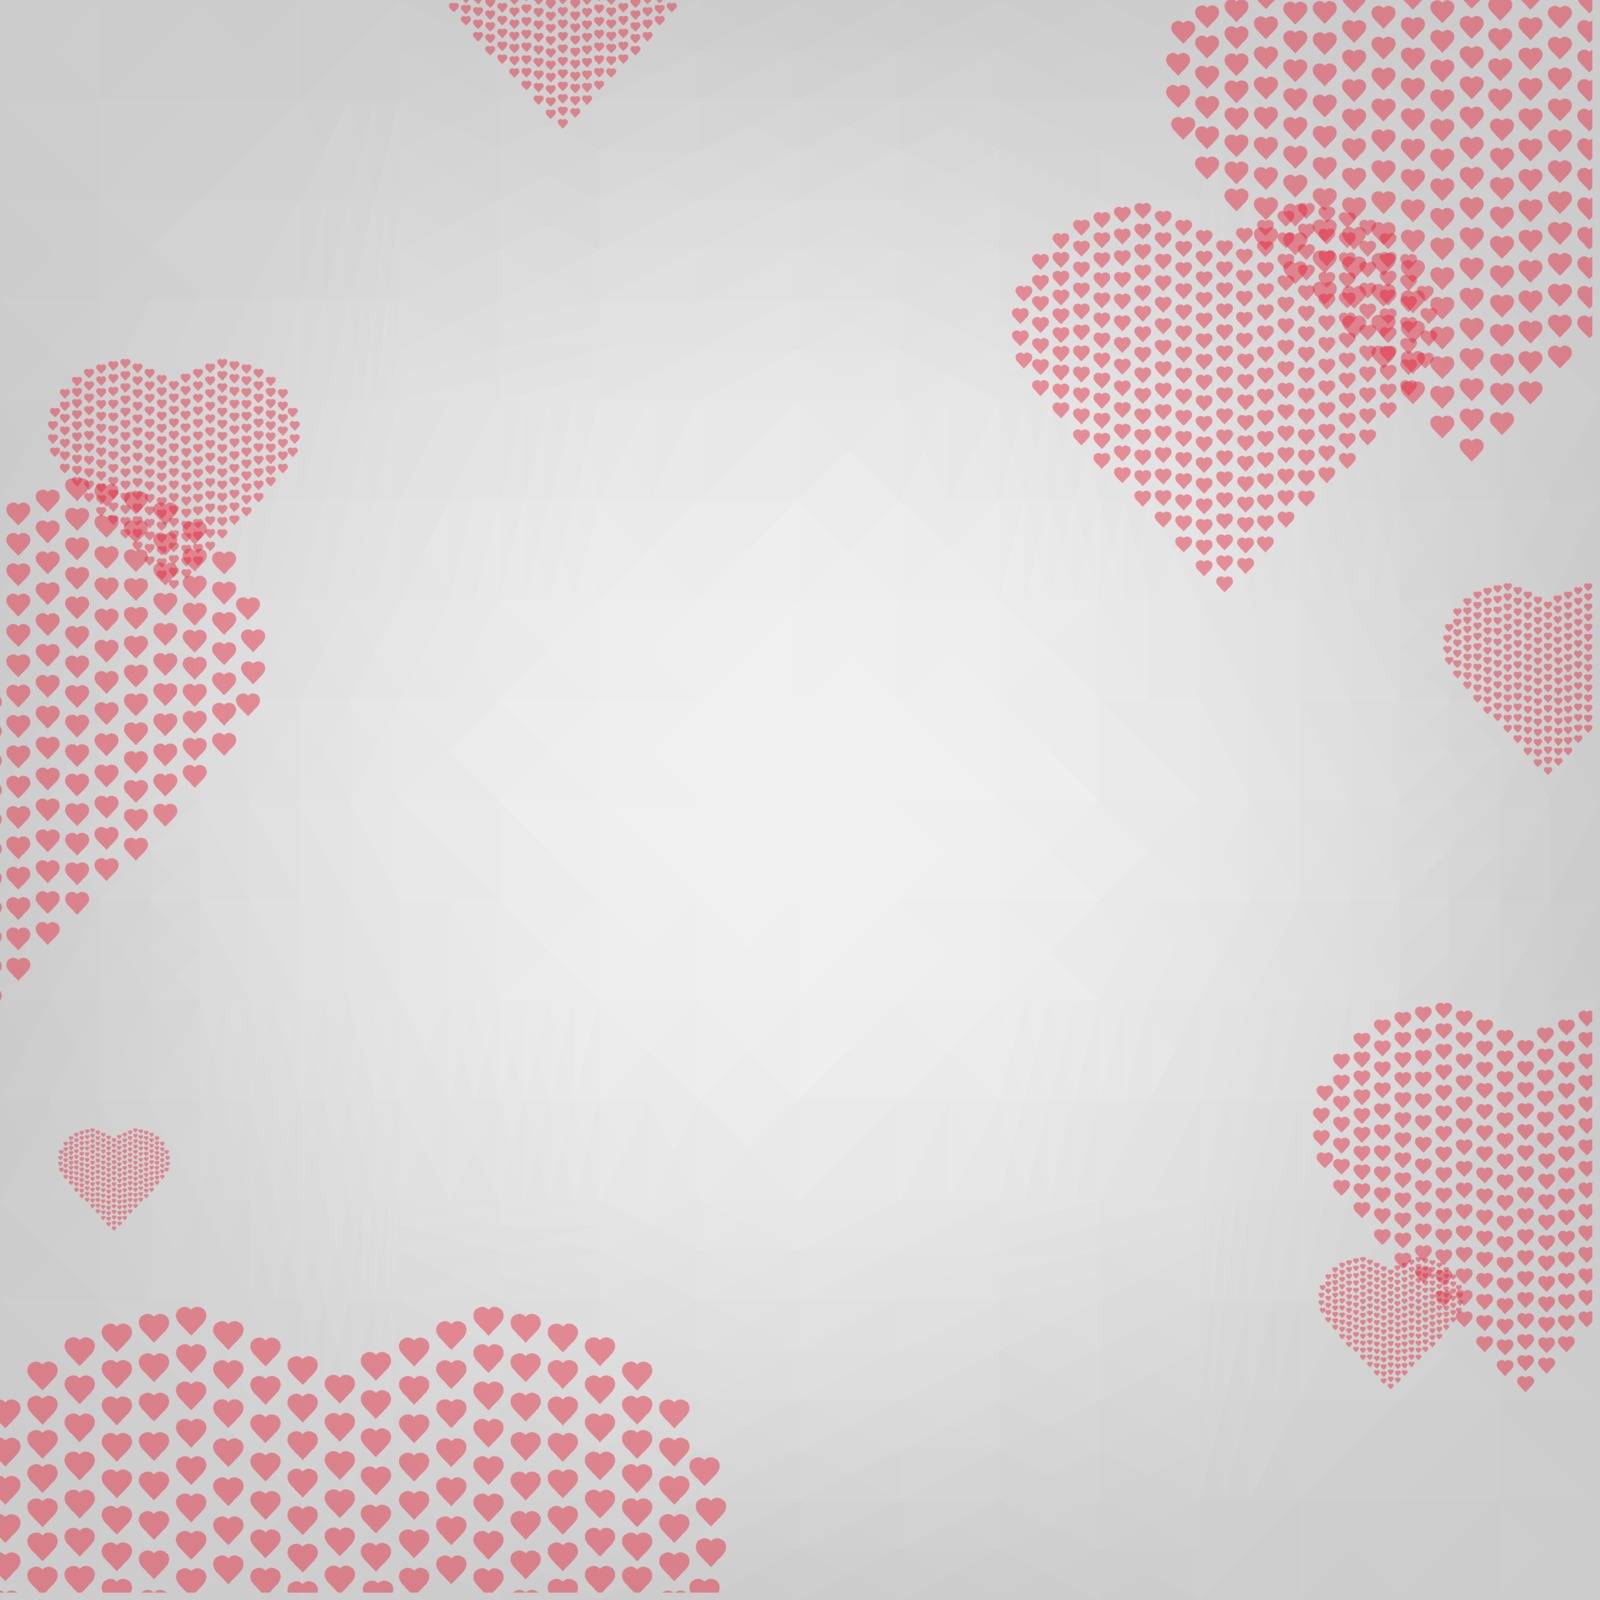 Heart With Grey Background With Gradient Mesh, Vector Illustration